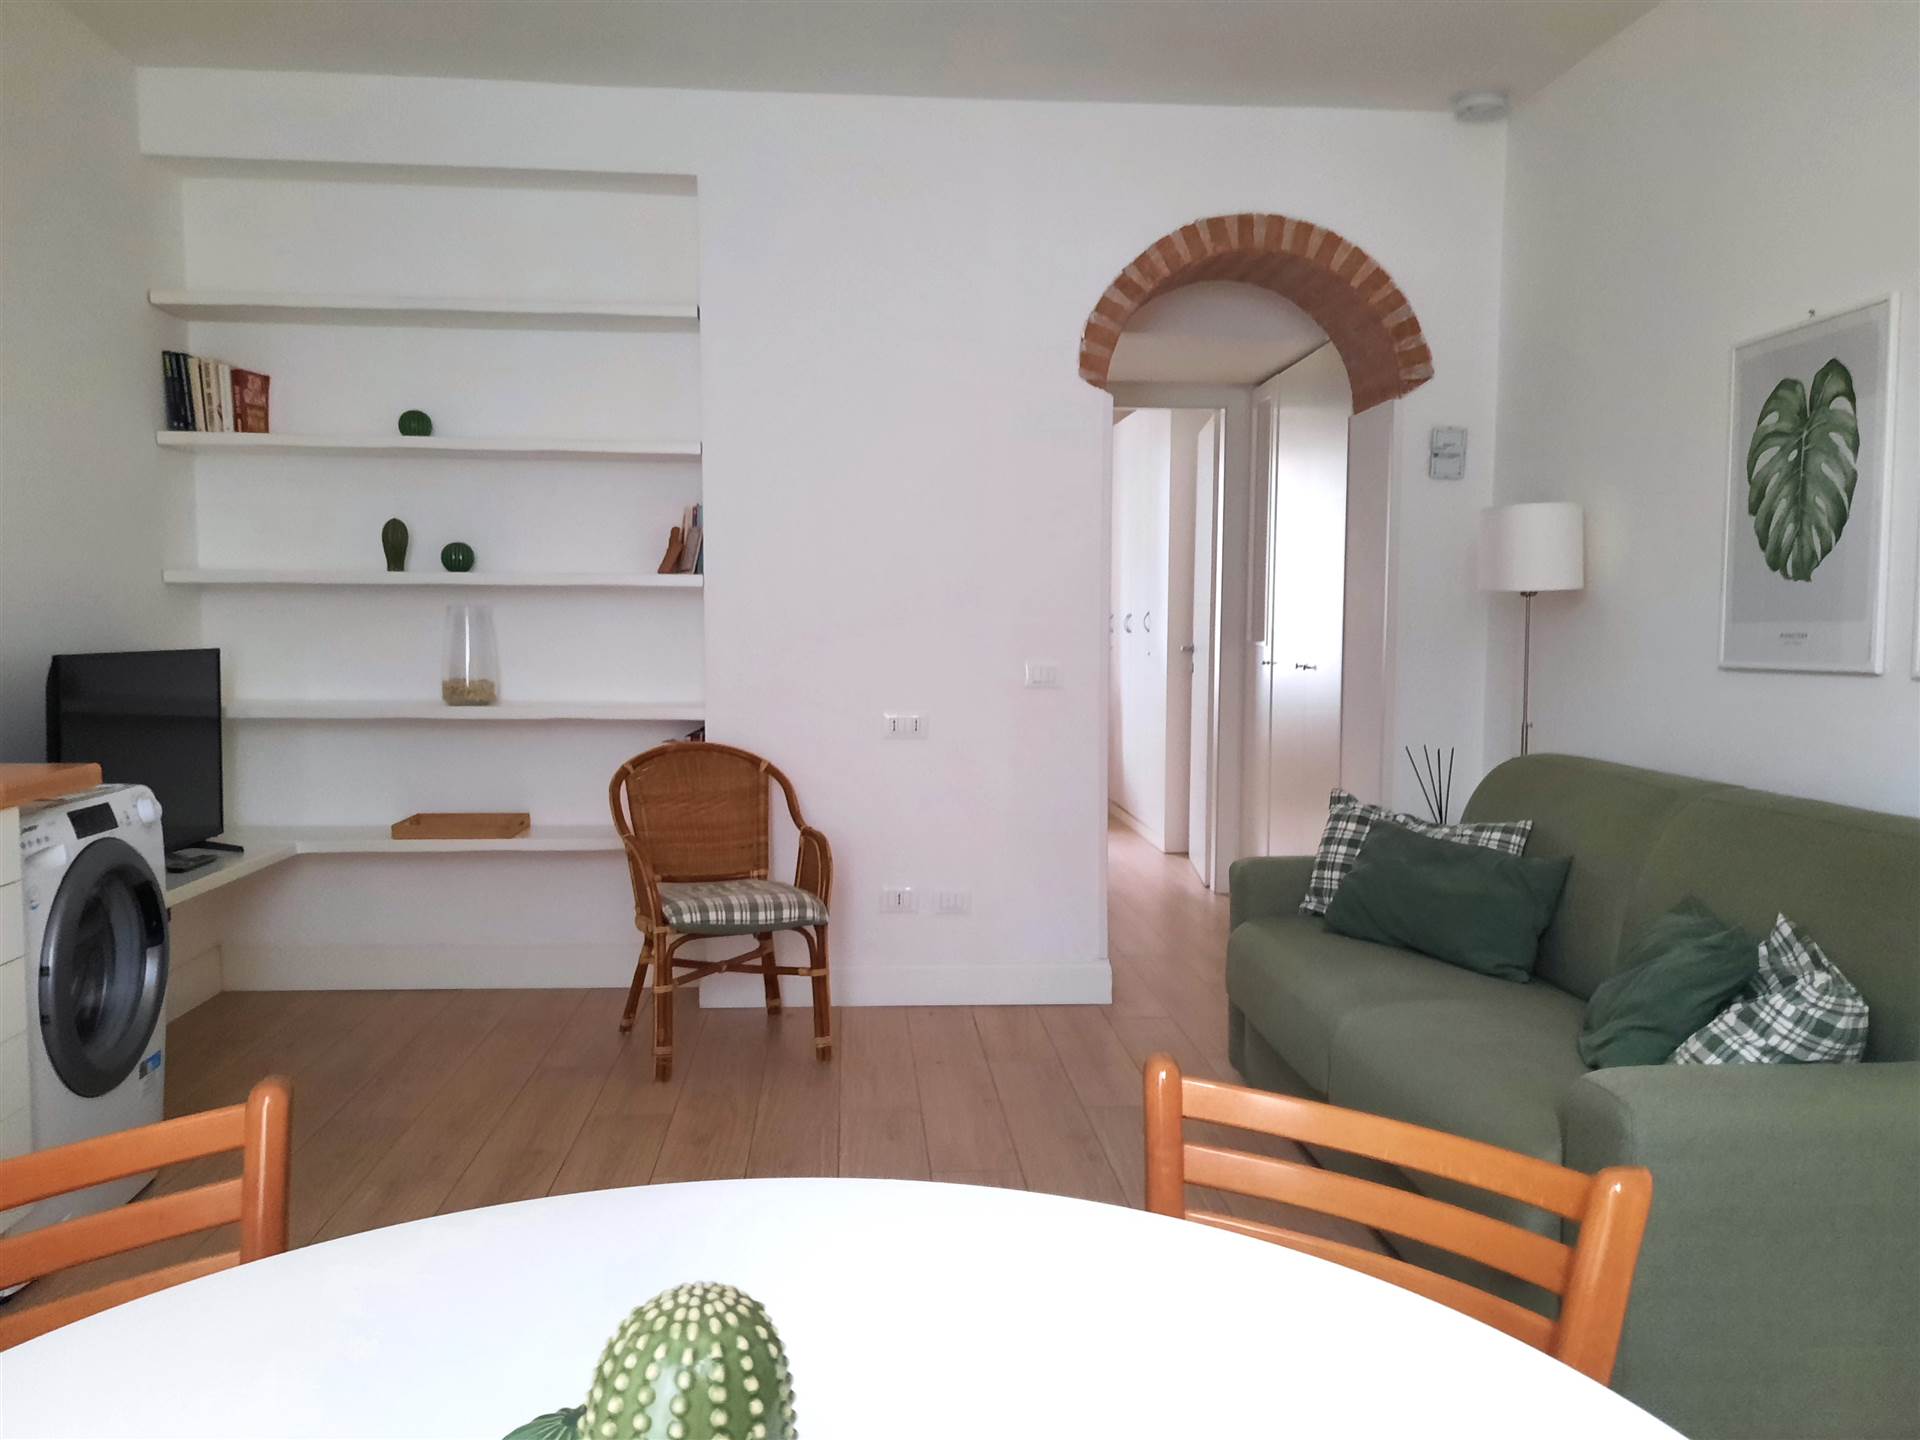 DE ANGELI, MILANO, Apartment for rent of 50 Sq. mt., Restored, Heating Individual heating system, Energetic class: F, placed at 3° on 3, composed by: 